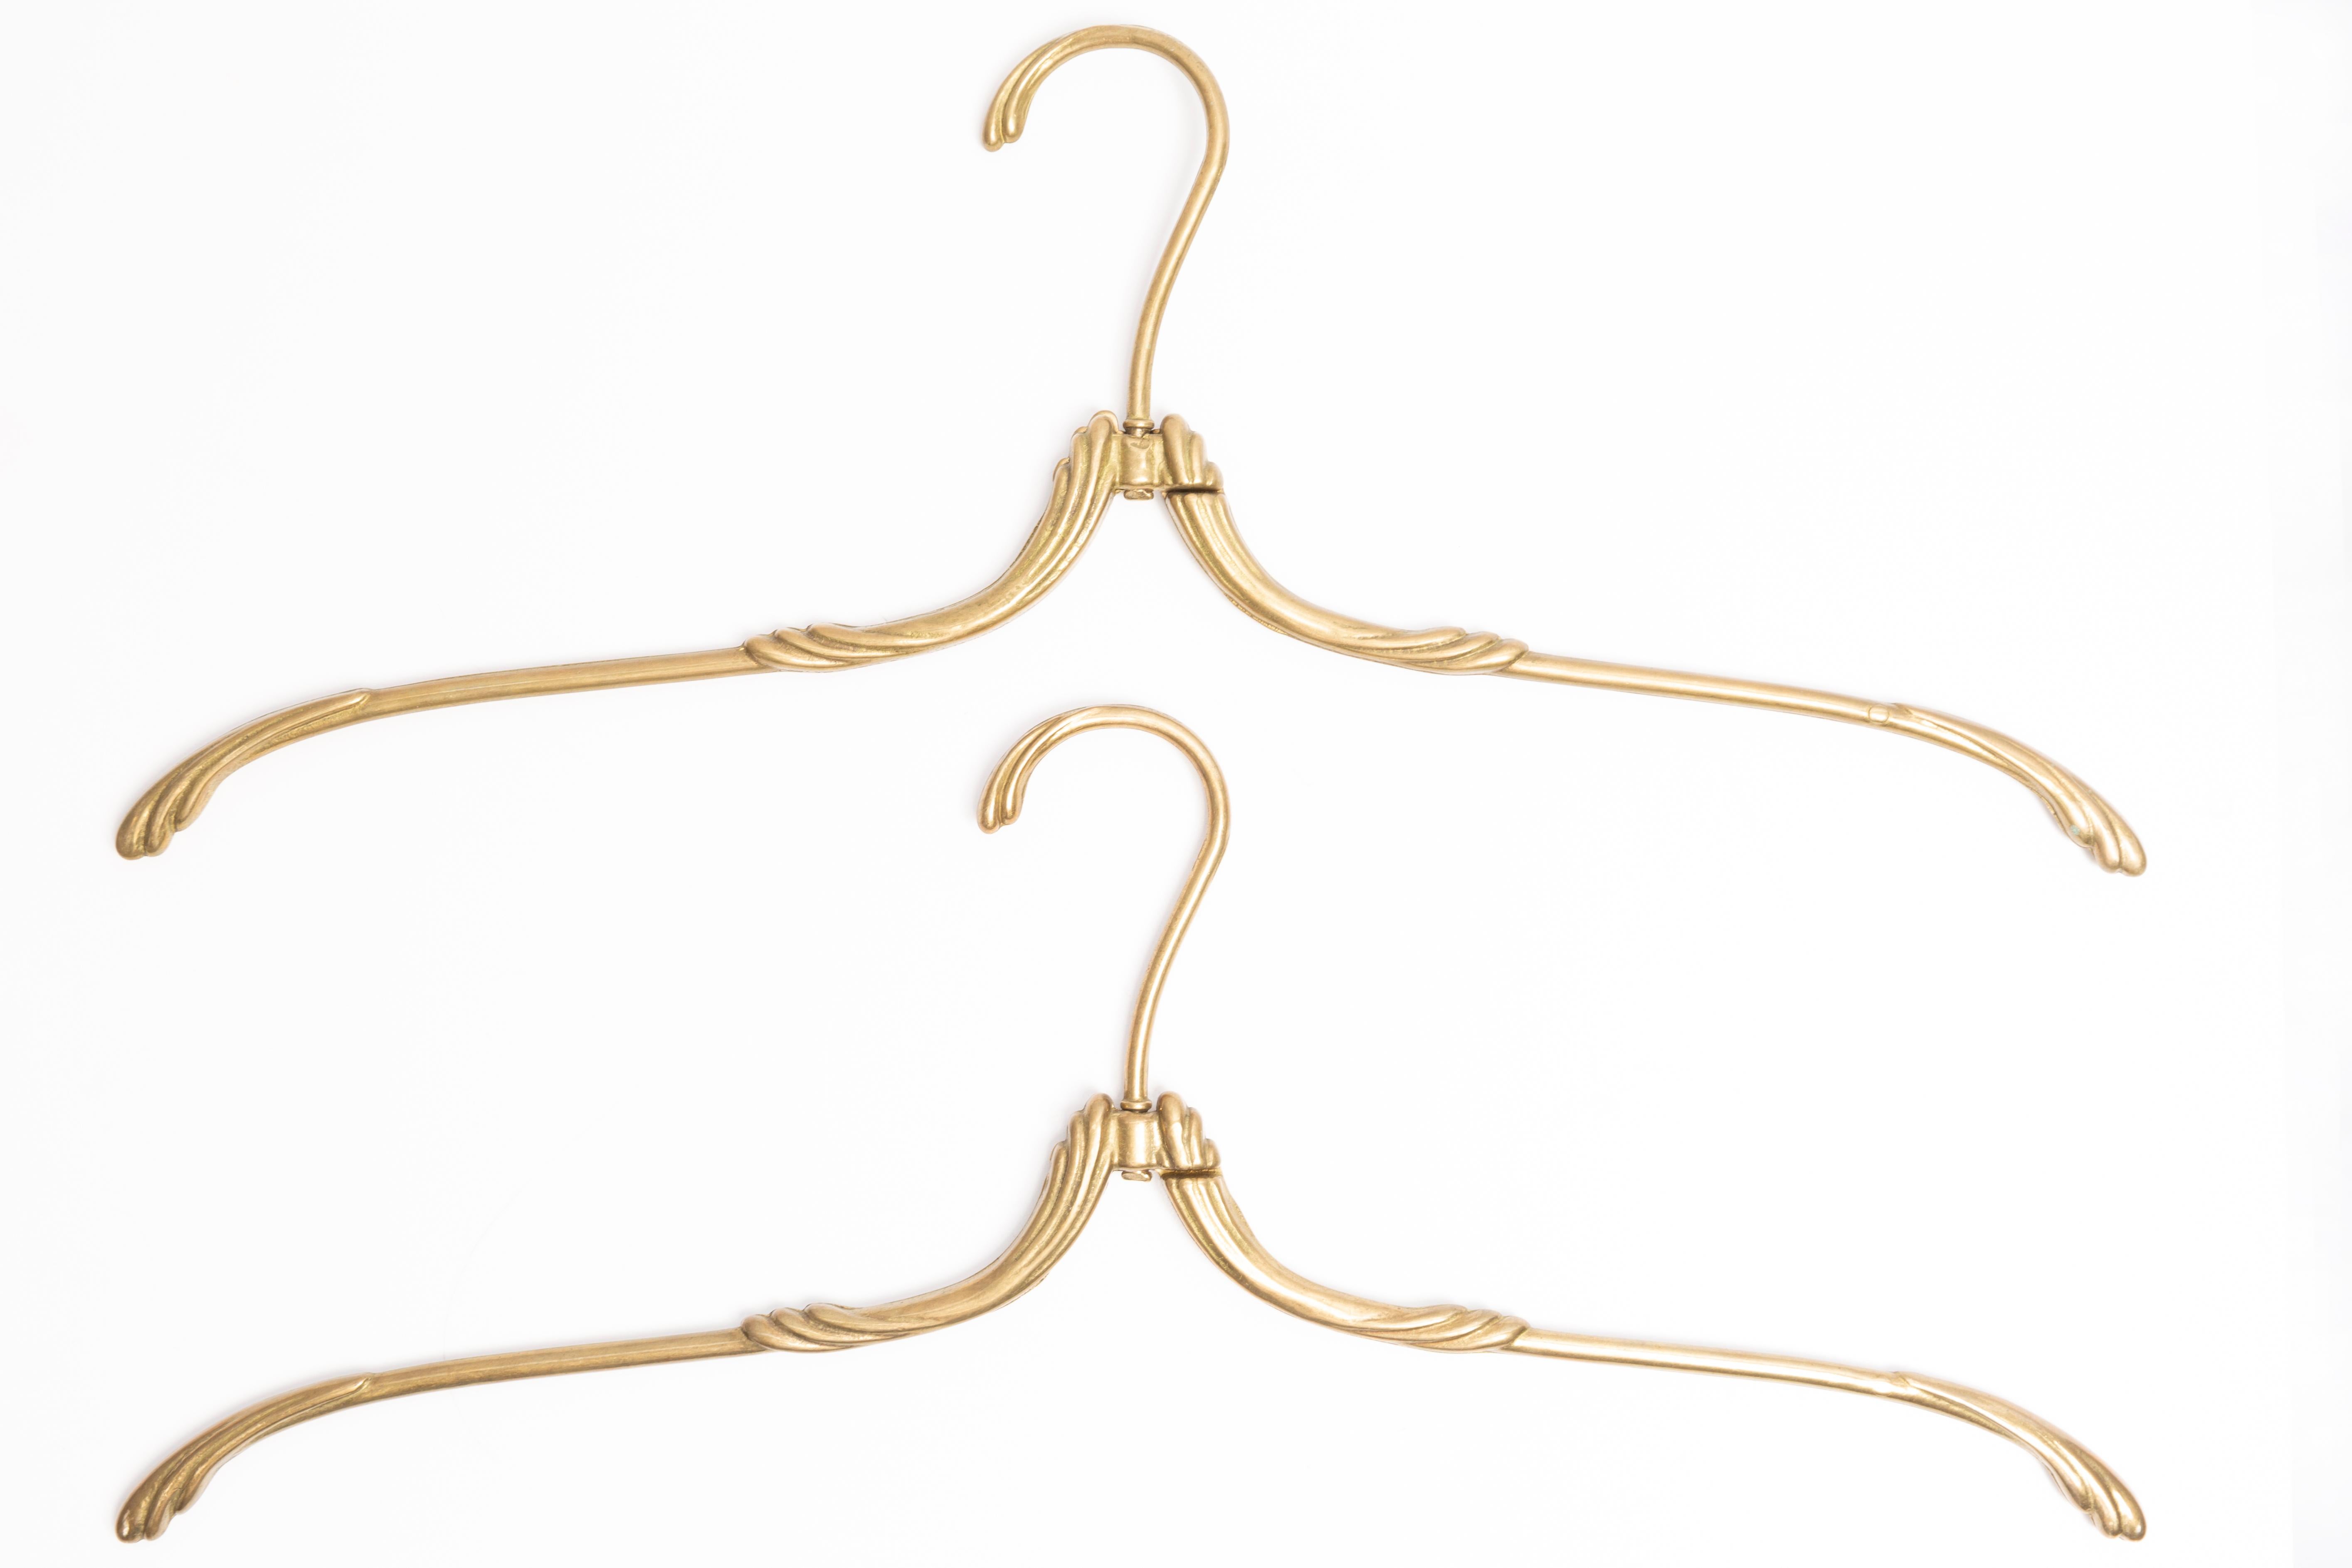 Hollywood Regency Pair of Mid Century Gold Hangers, Germany, Europe, 1960s For Sale